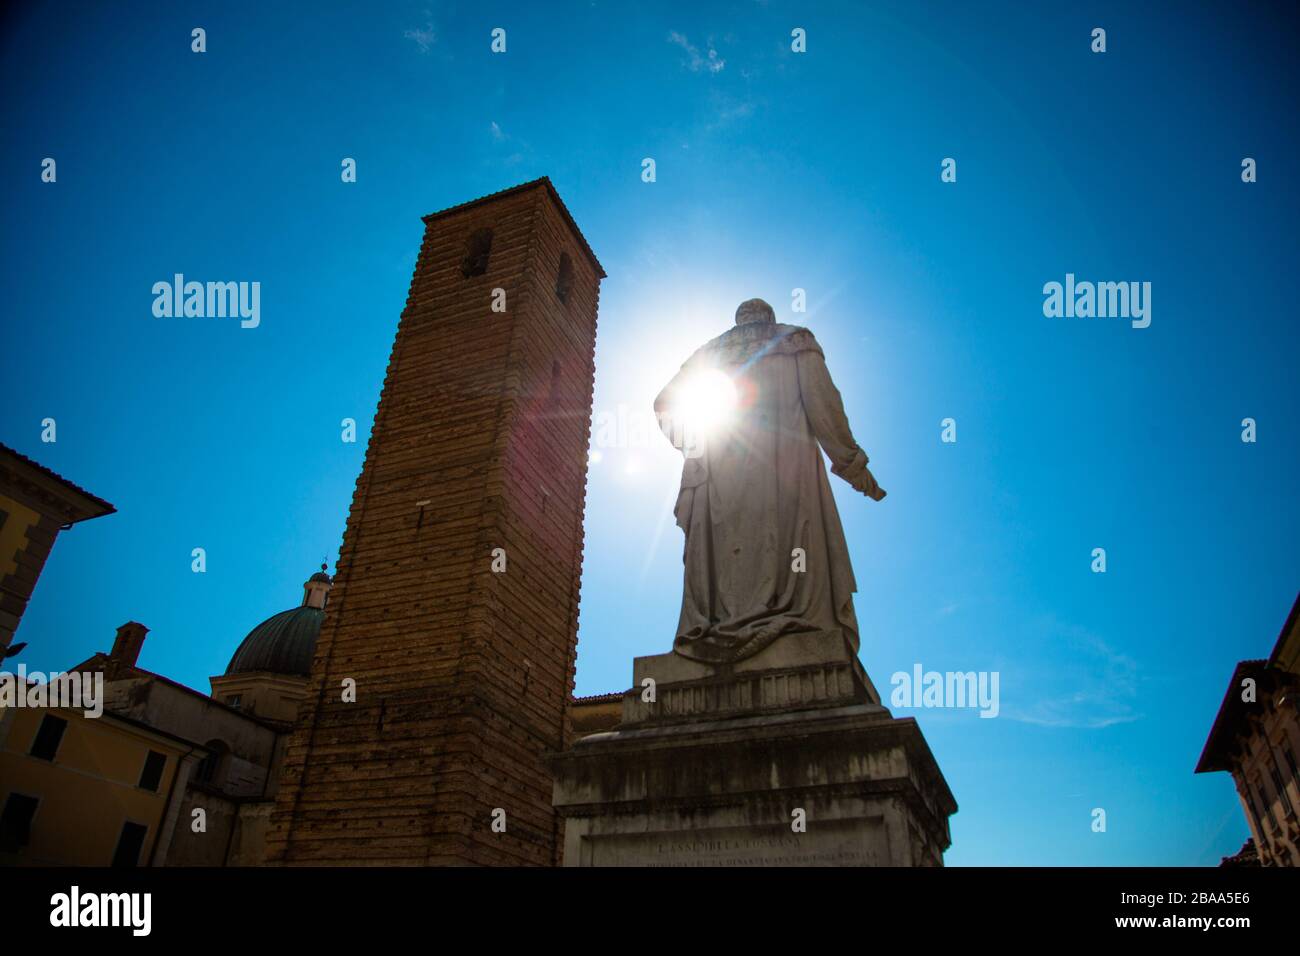 The statue of Leopoldo II situated in the main square of Massa, Italy in a beautiful blue sky day. Stock Photo